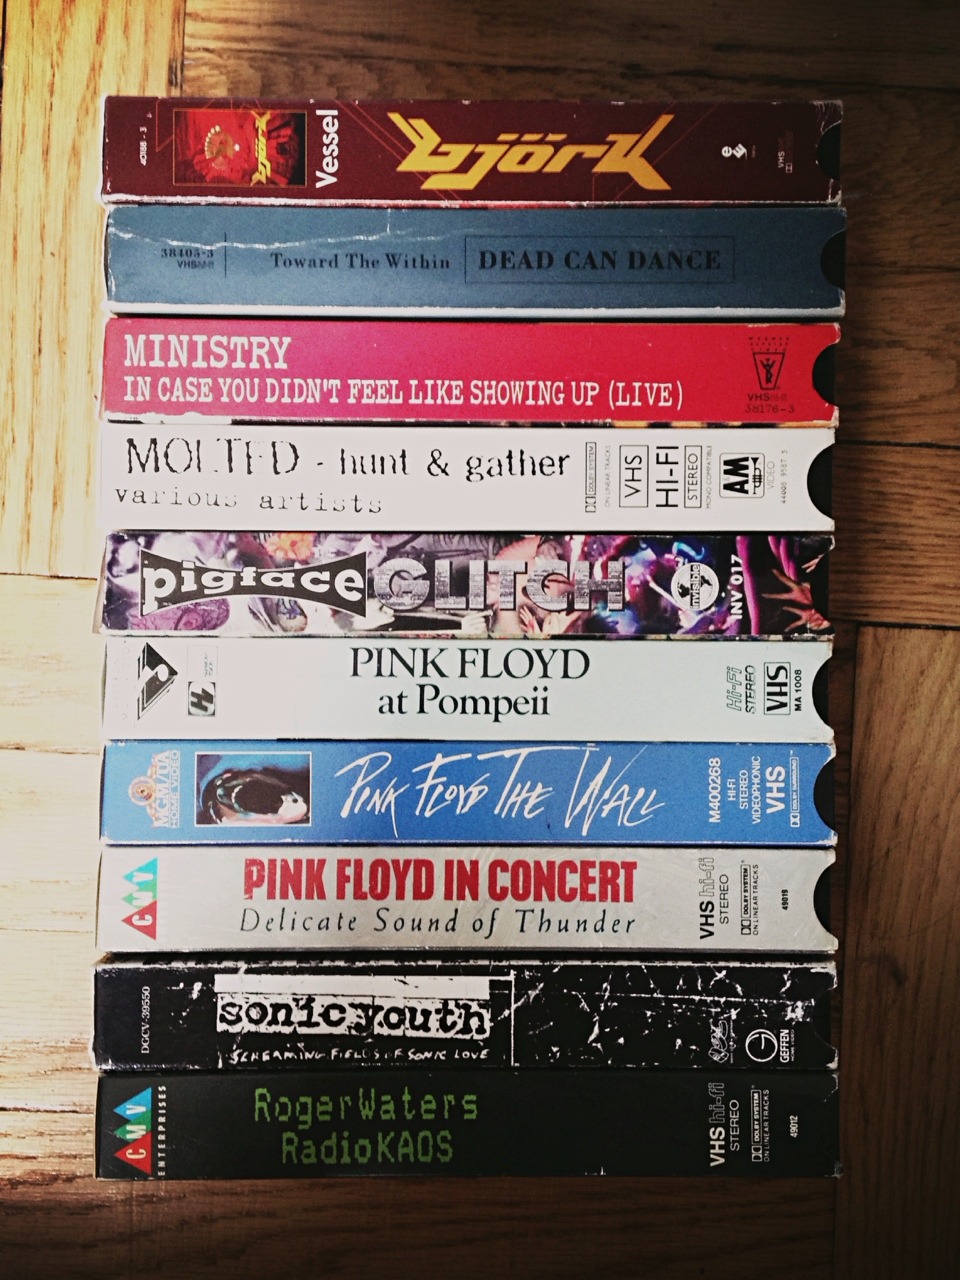 Just found some old music/concert VHS Tapes under the bed.